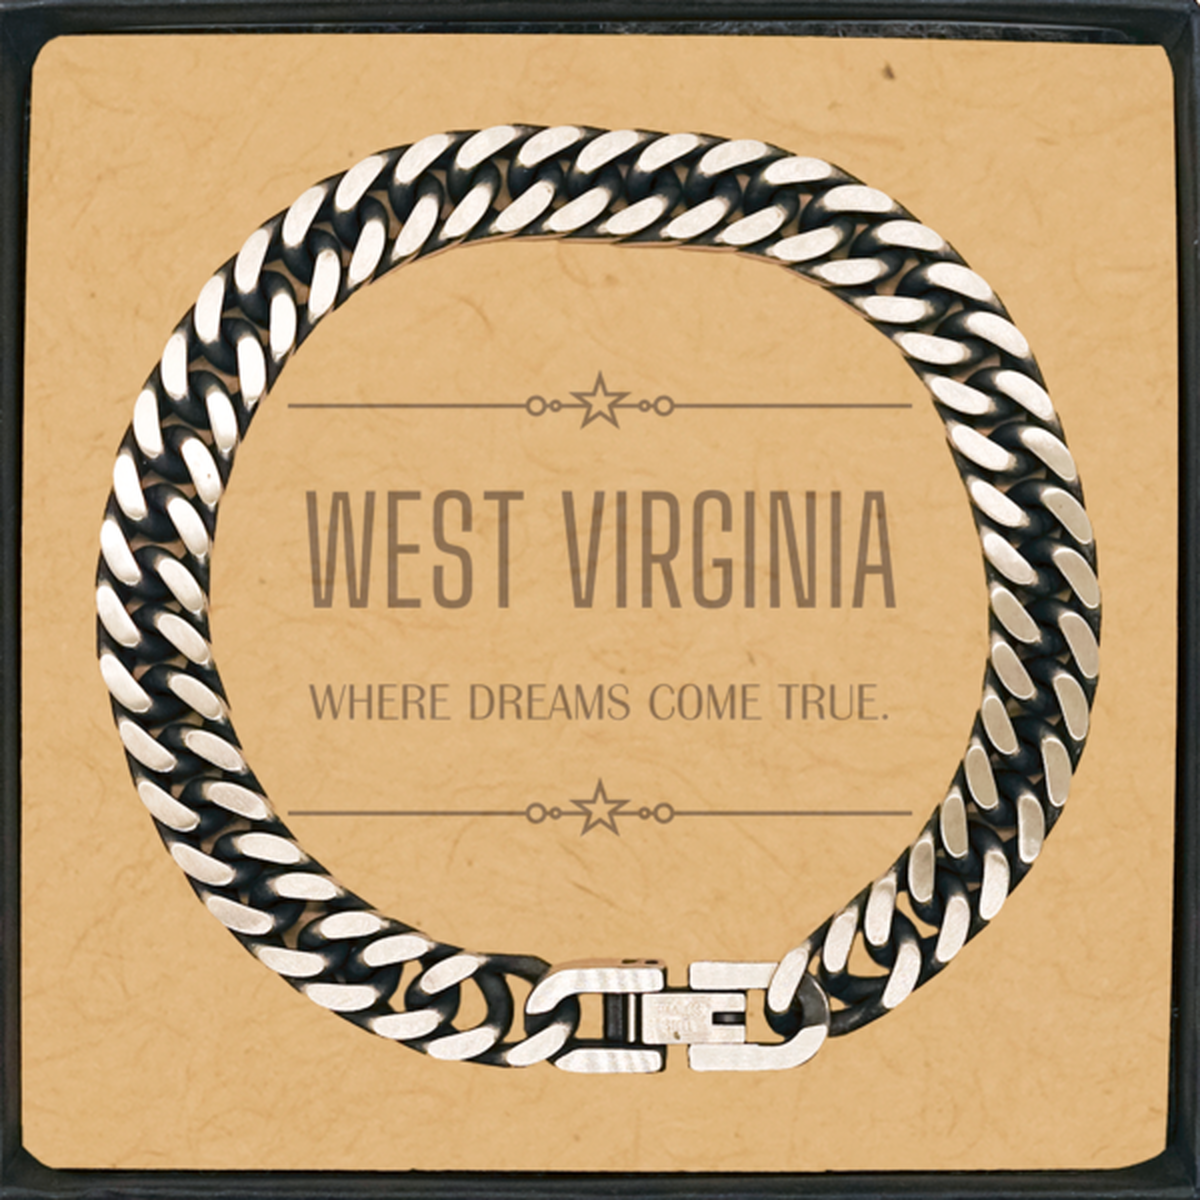 Love West Virginia State Cuban Link Chain Bracelet, West Virginia Where dreams come true, Birthday Inspirational Gifts For West Virginia Men, Women, Friends